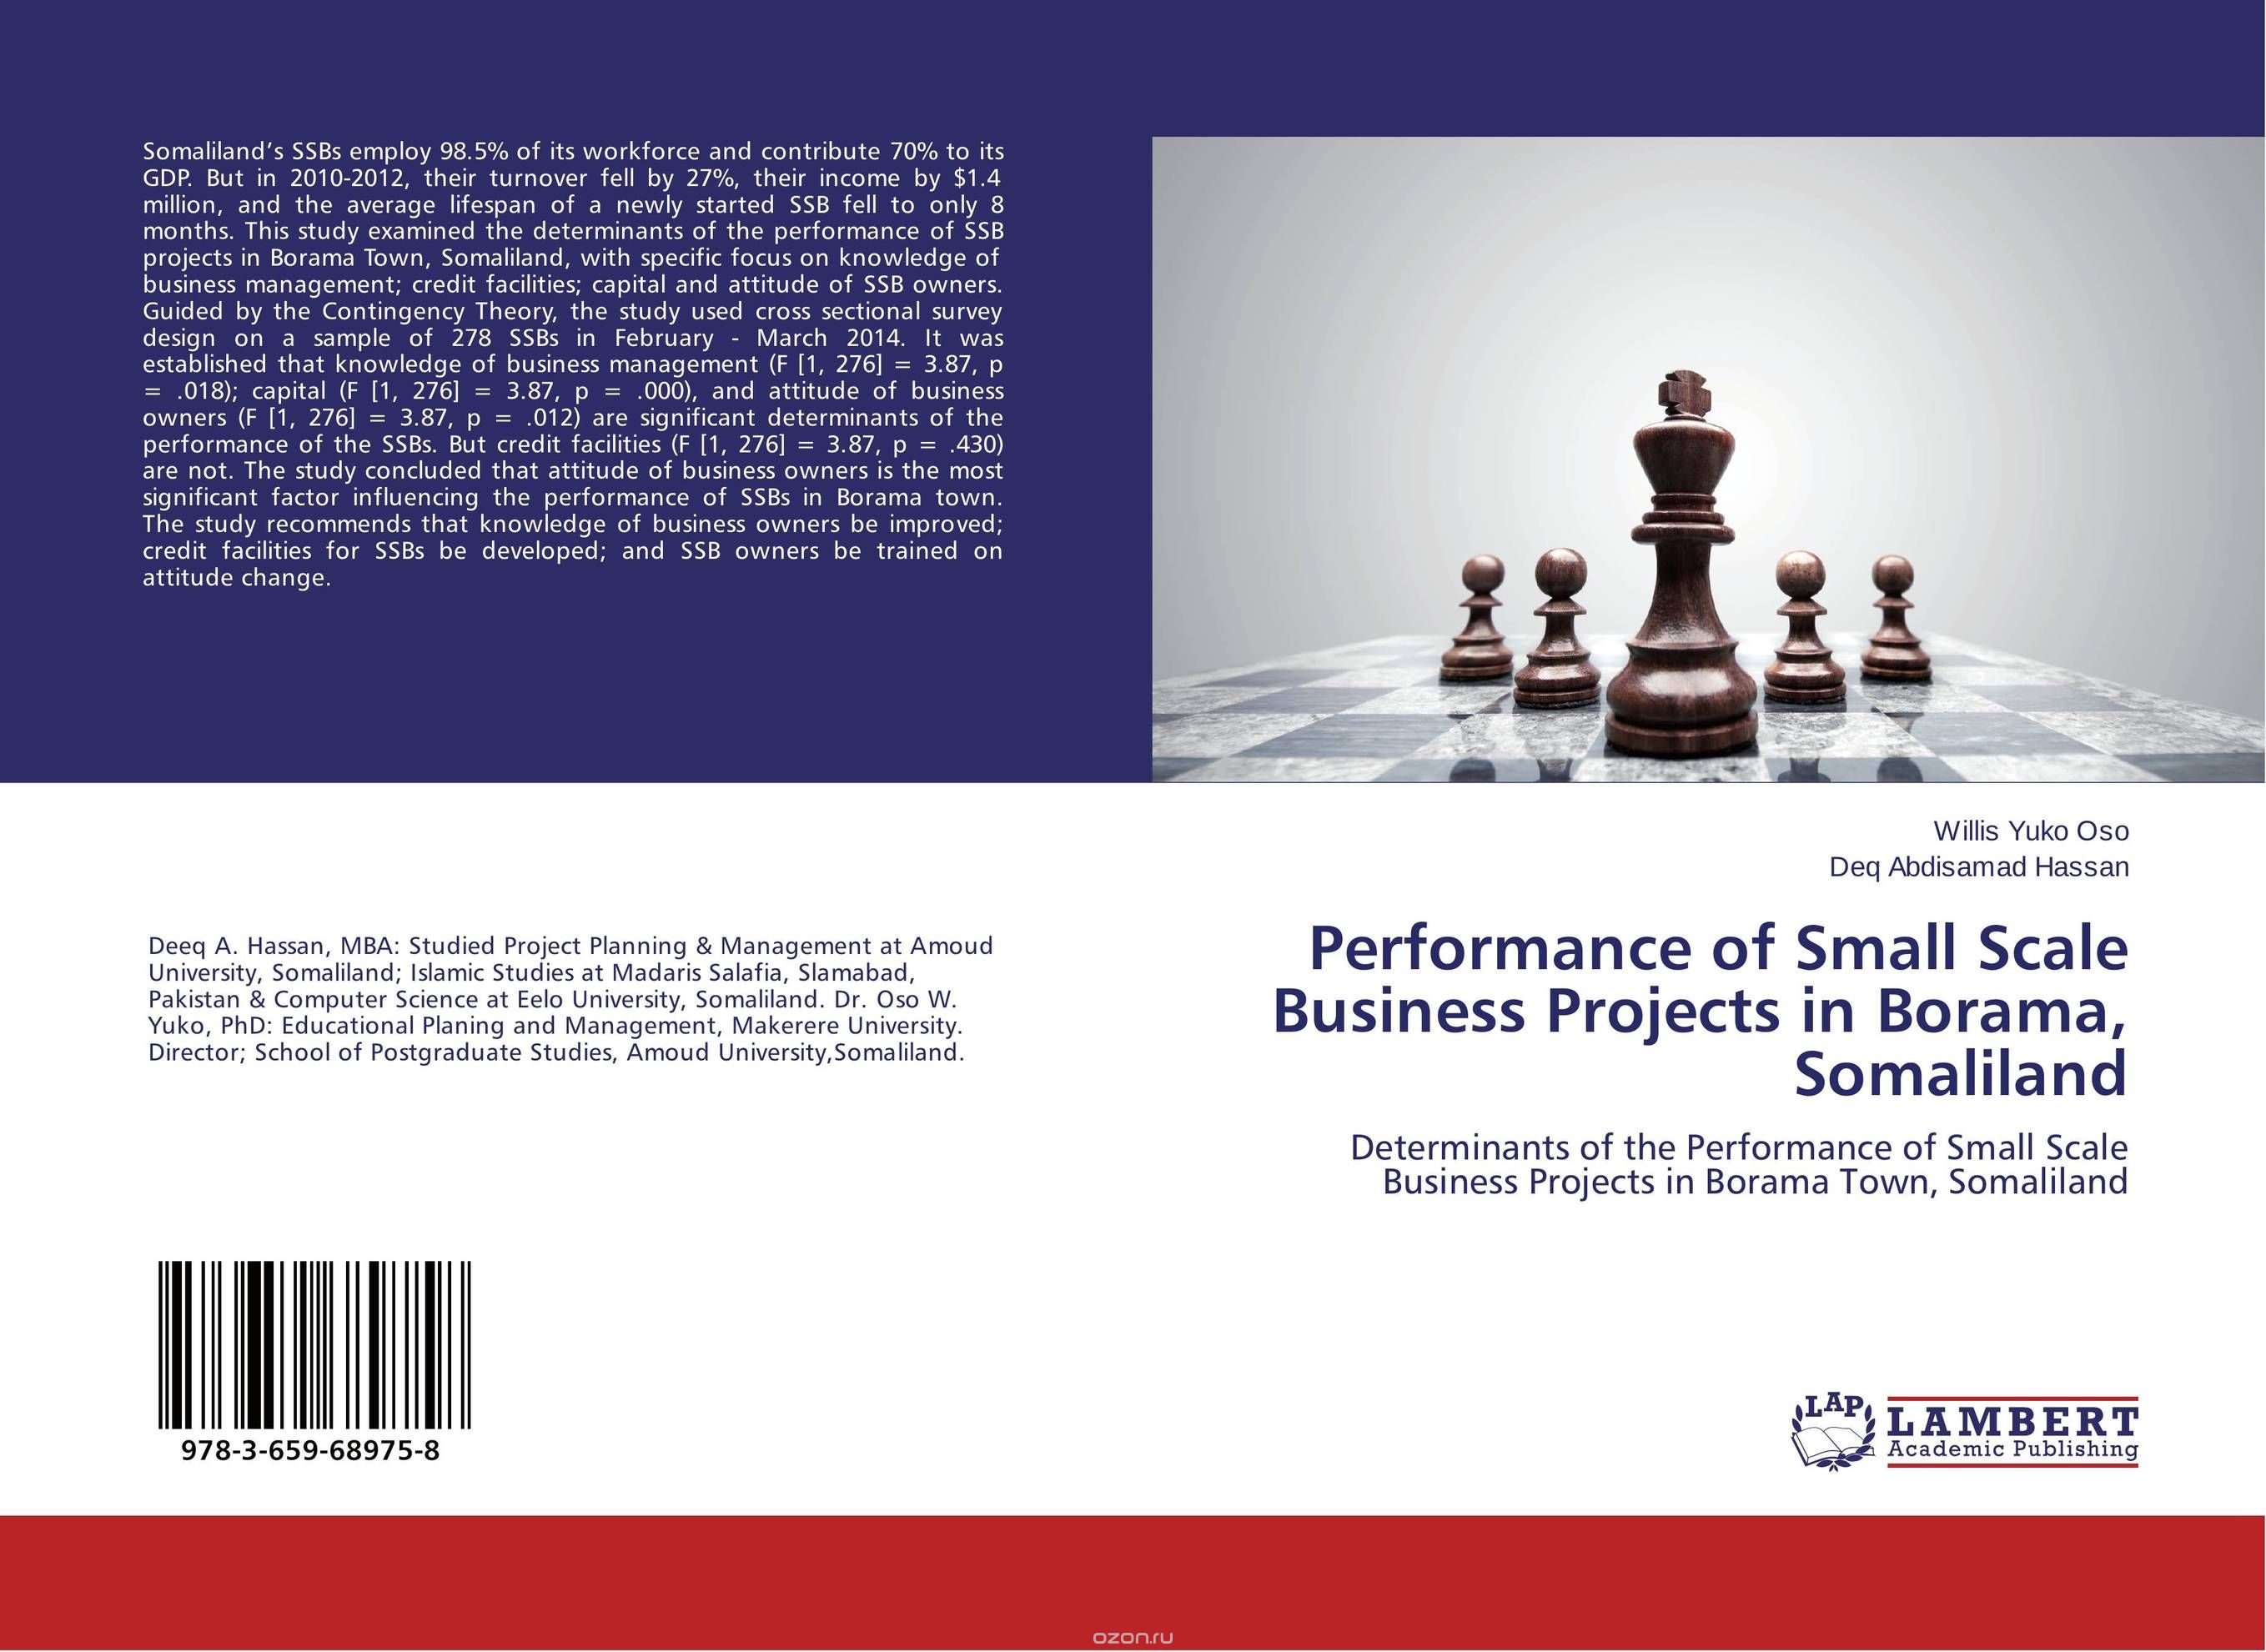 Performance of Small Scale Business Projects in Borama, Somaliland